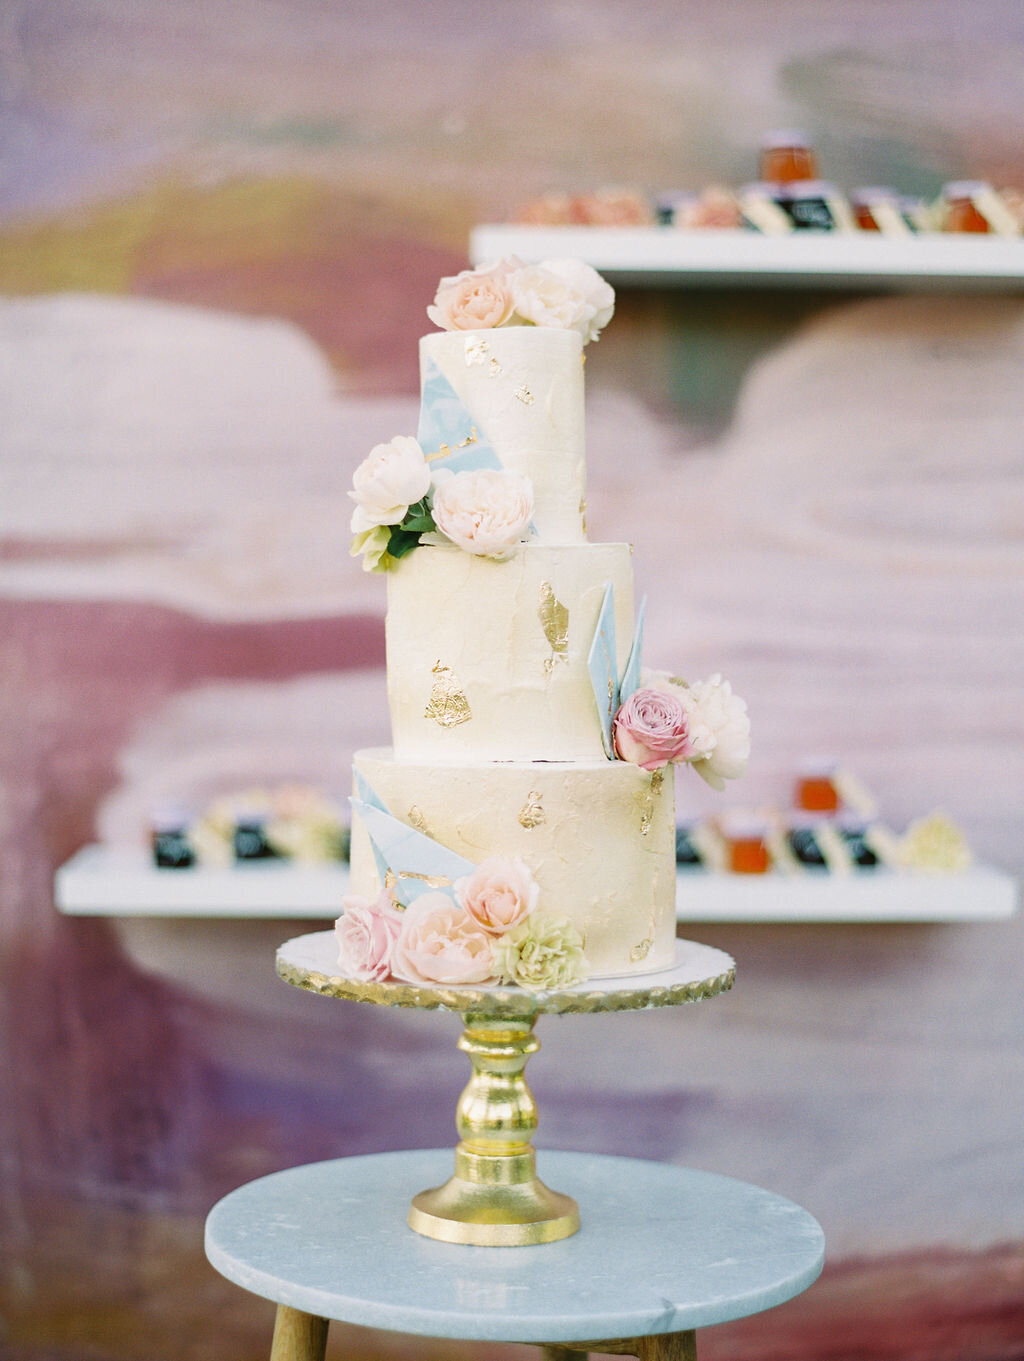 three tiered wedding cake with watercolor and lavender touches.